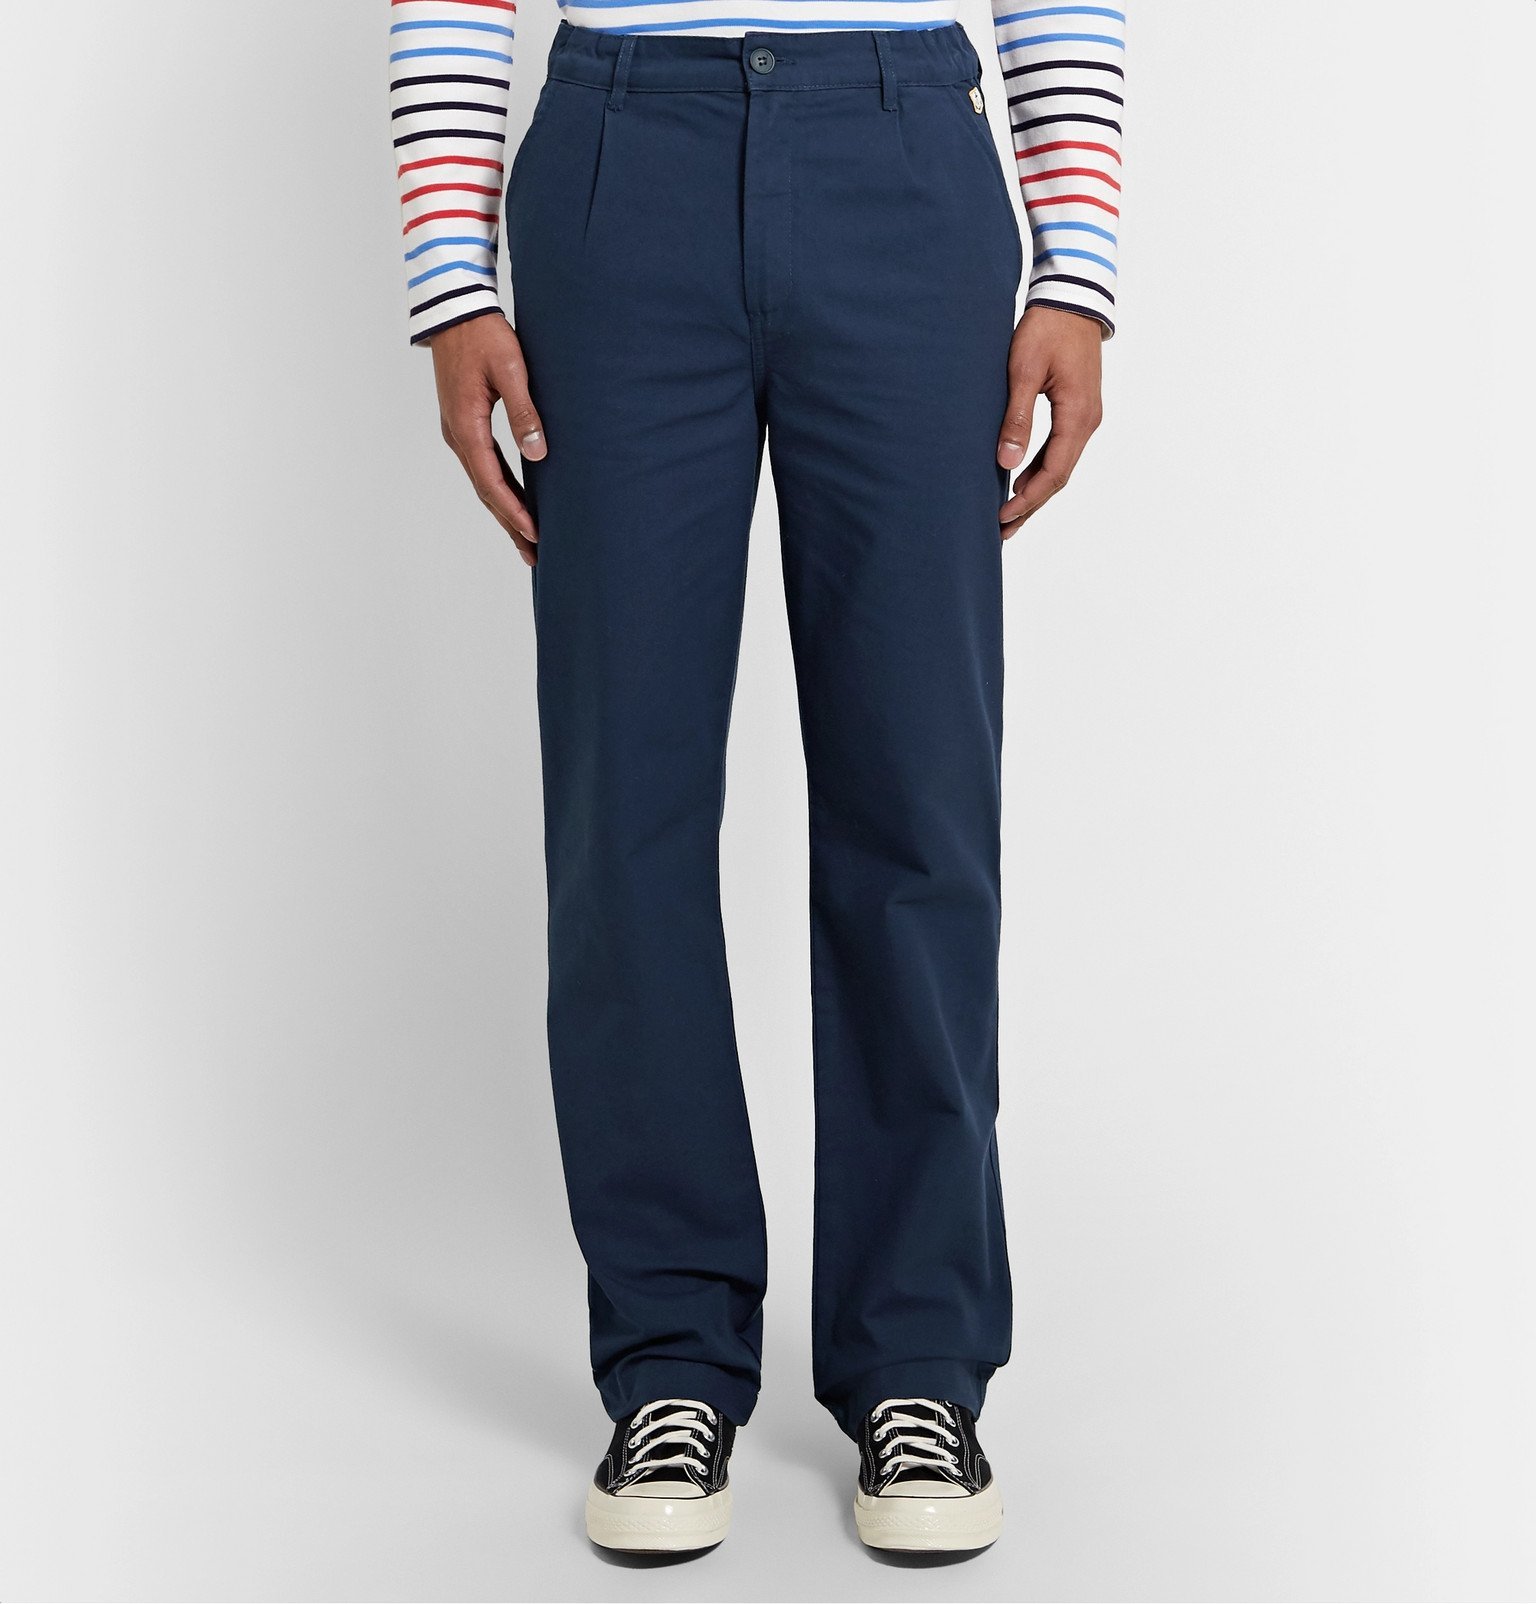 Armor Lux - Navy Cotton Trousers - Blue Armor Lux